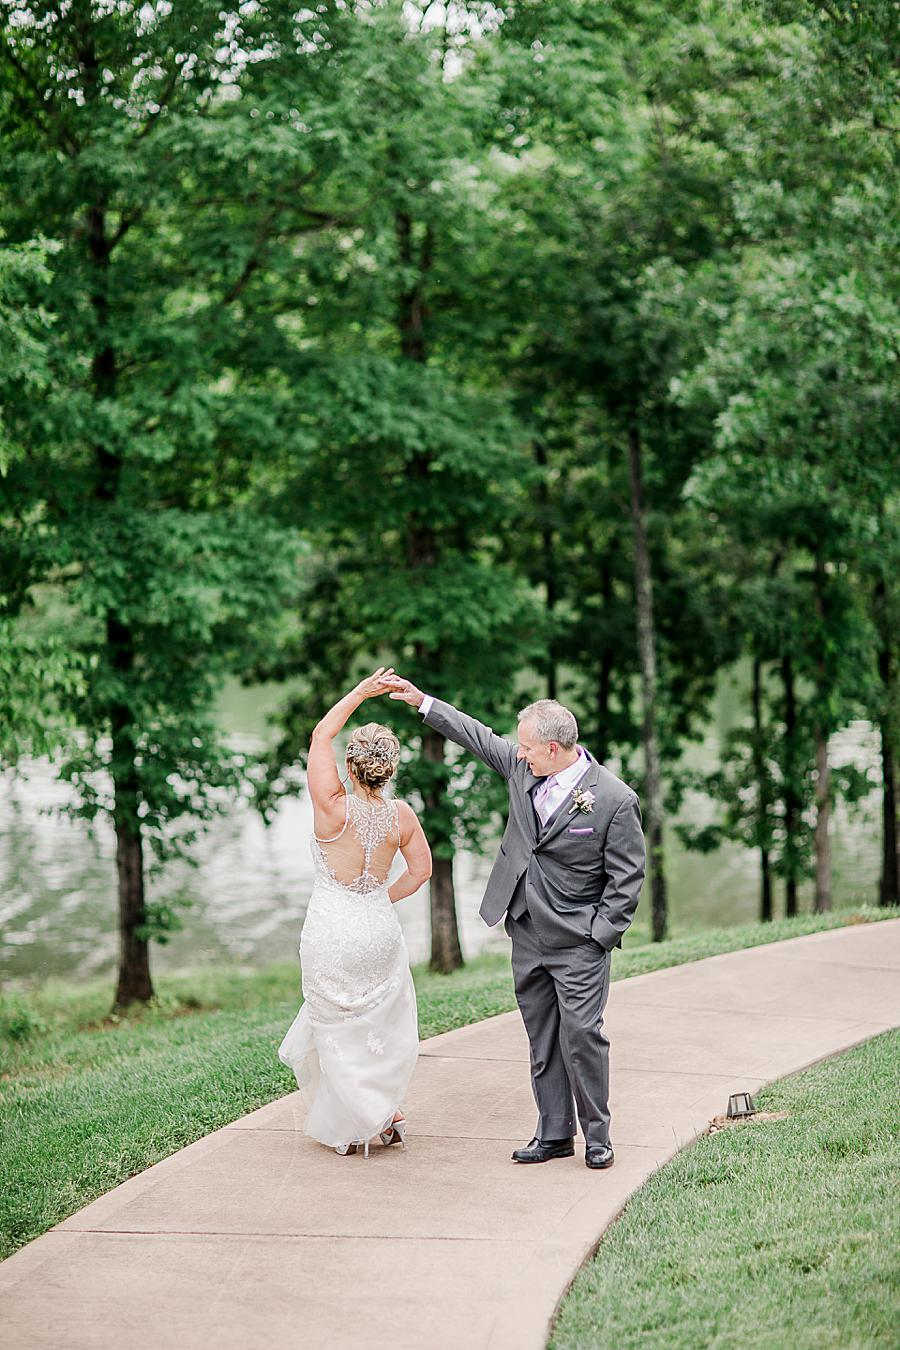 Twirling at this intimate WindRiver wedding by Knoxville Wedding Photographer Amanda May Photos.